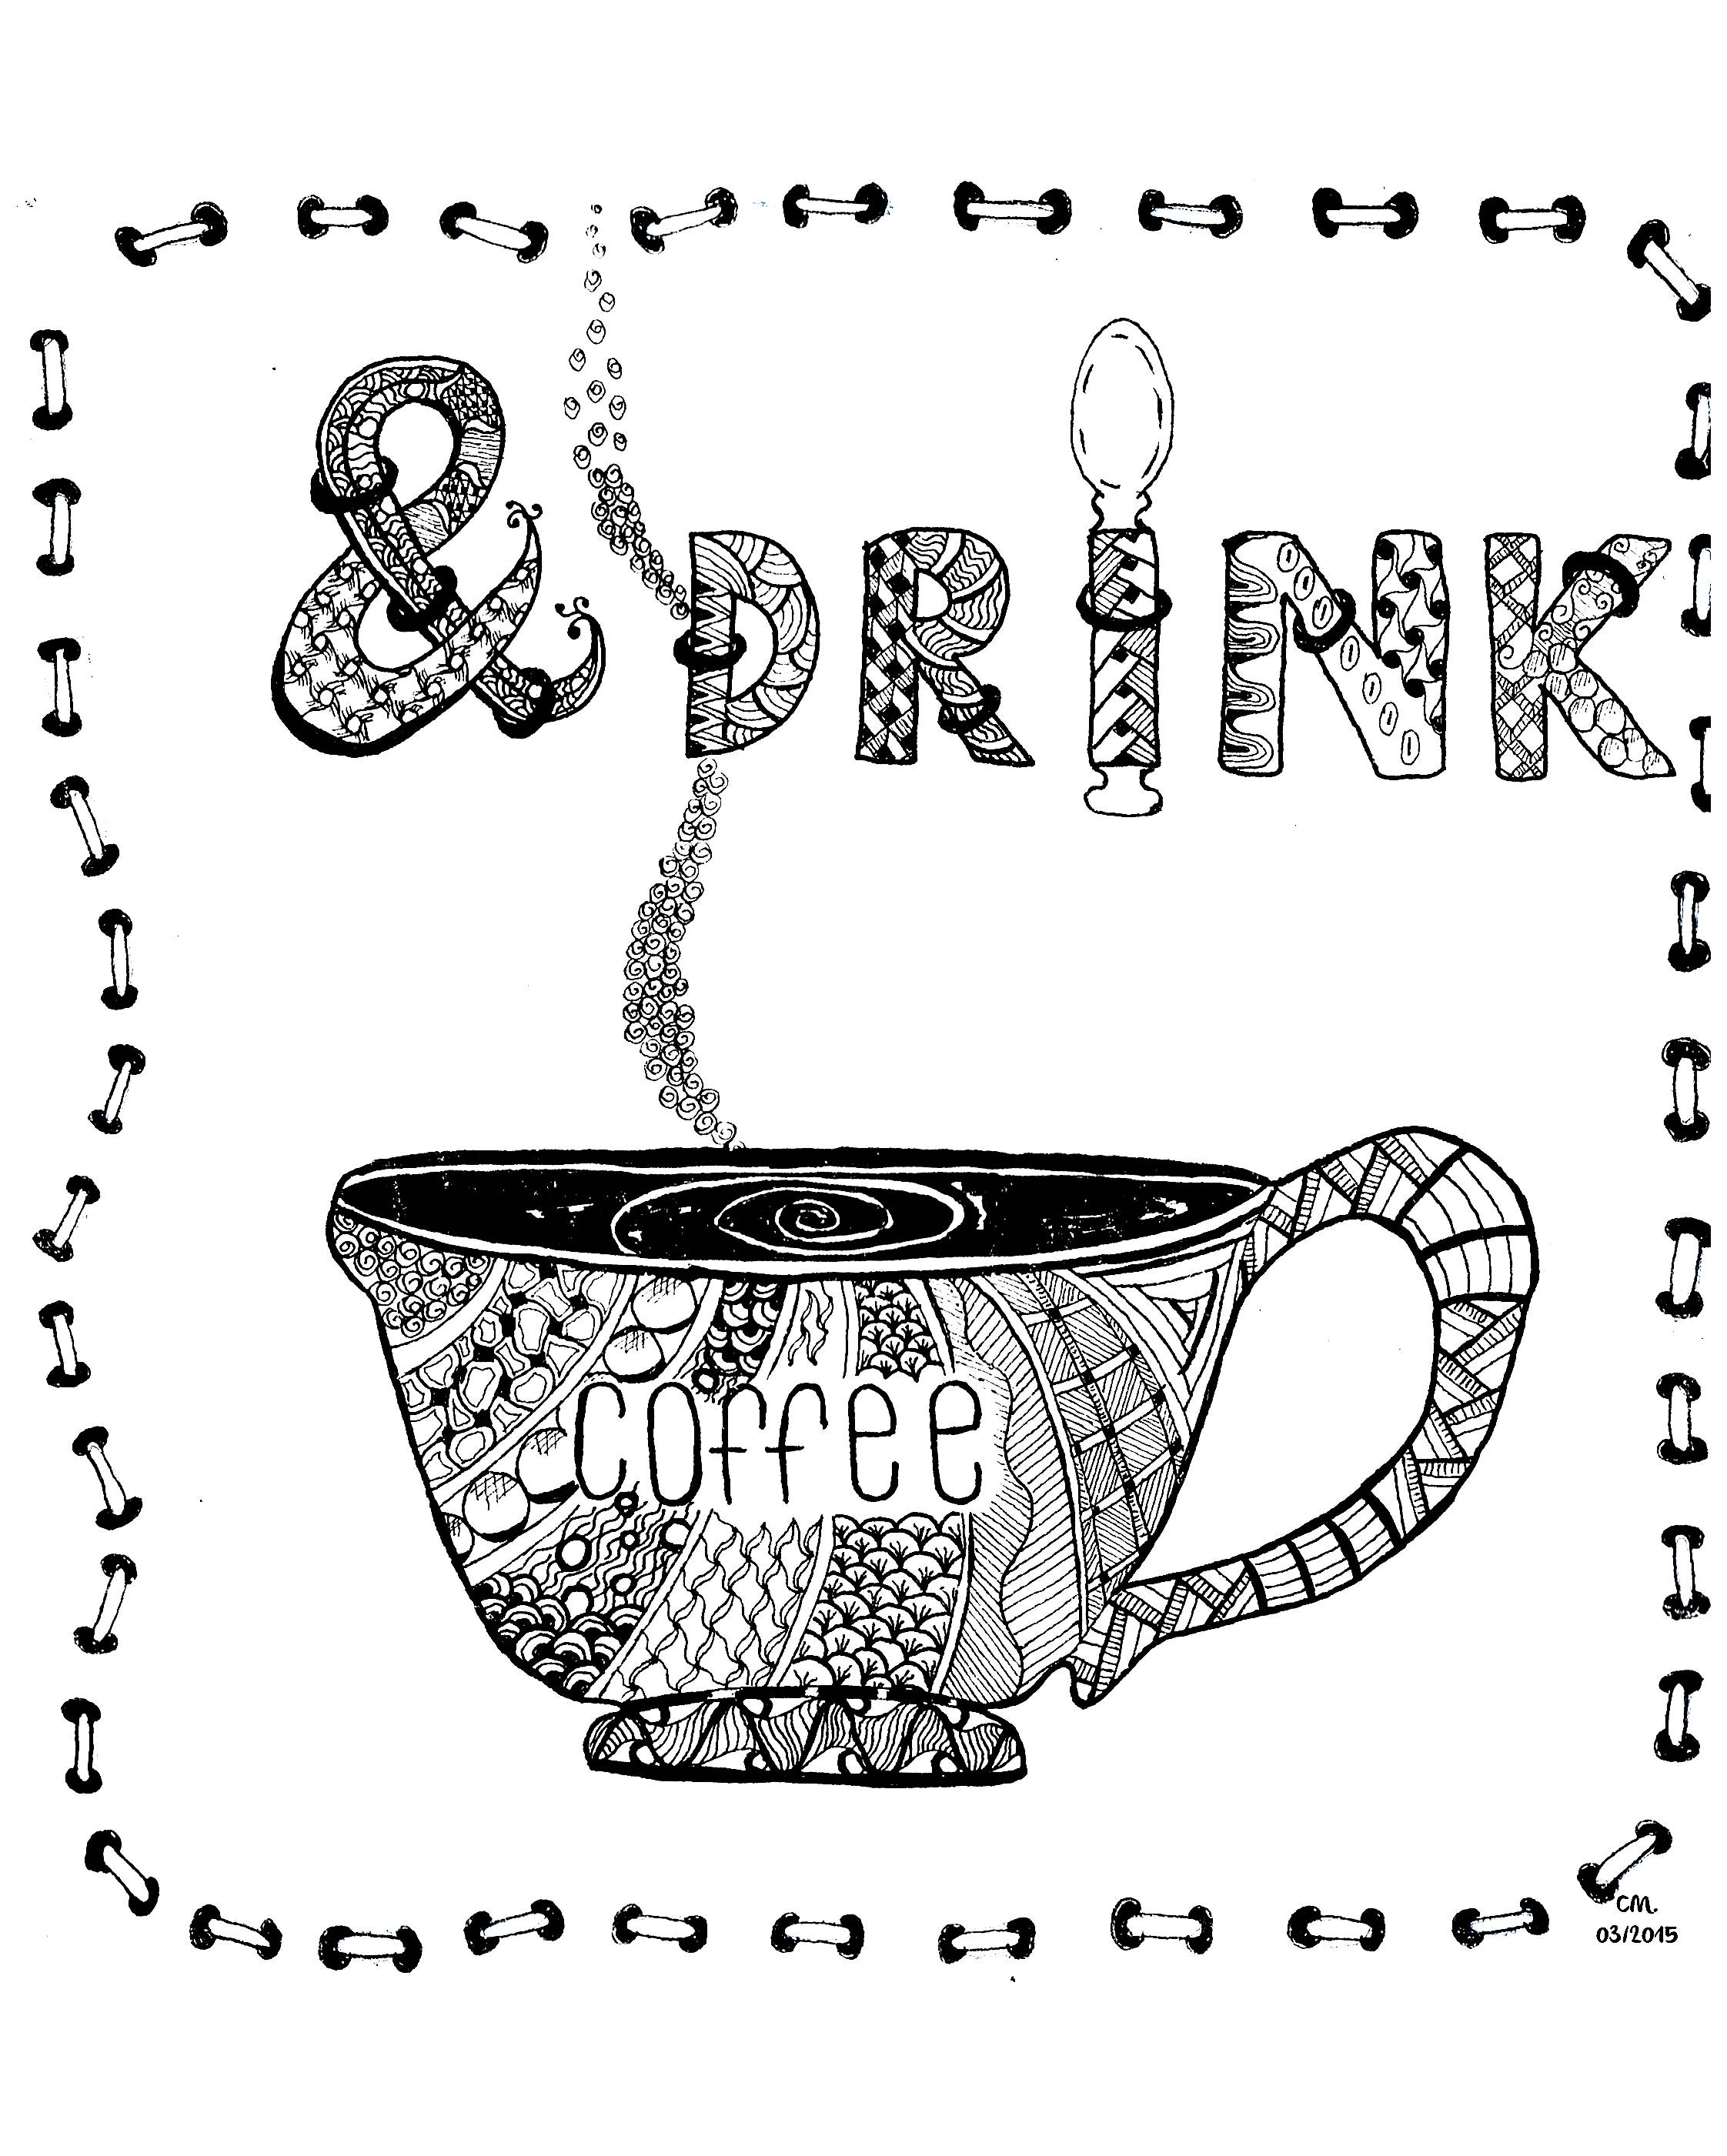 'Drink Coffee', exclusive coloring page, Artist : Cathy M